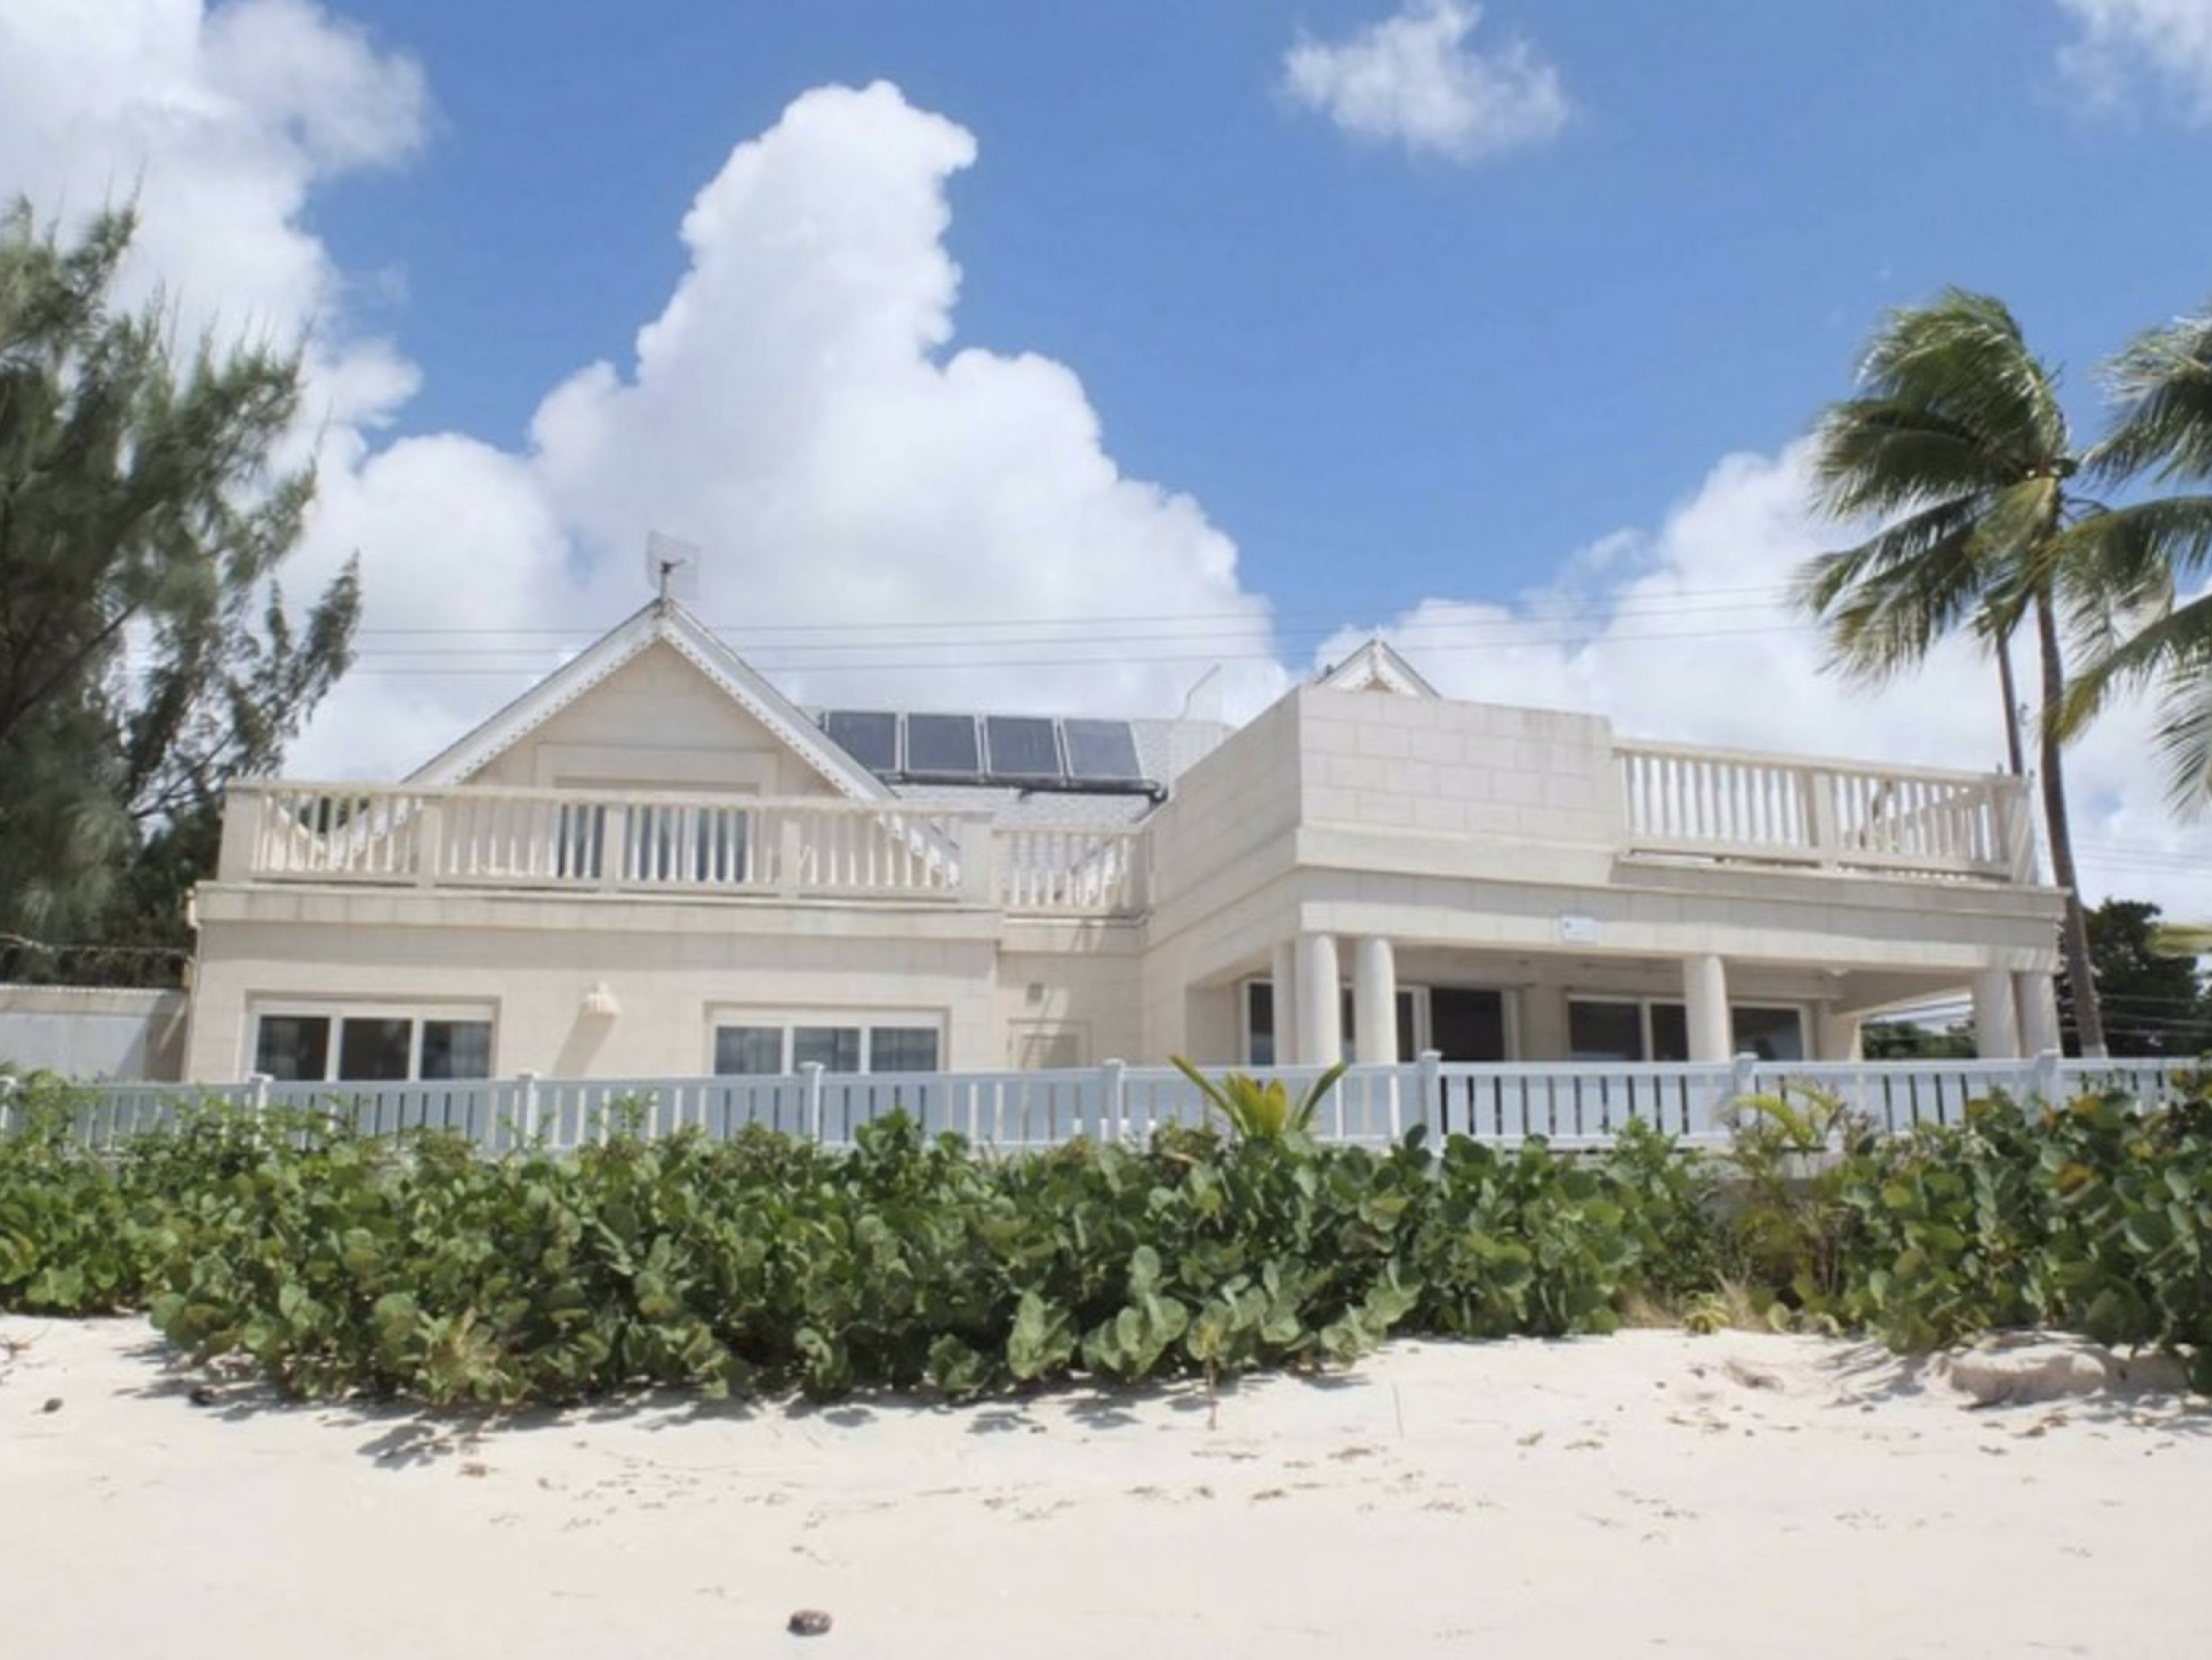 Cane Vale Beach House Vacation Rentals In Christ Church Barbados